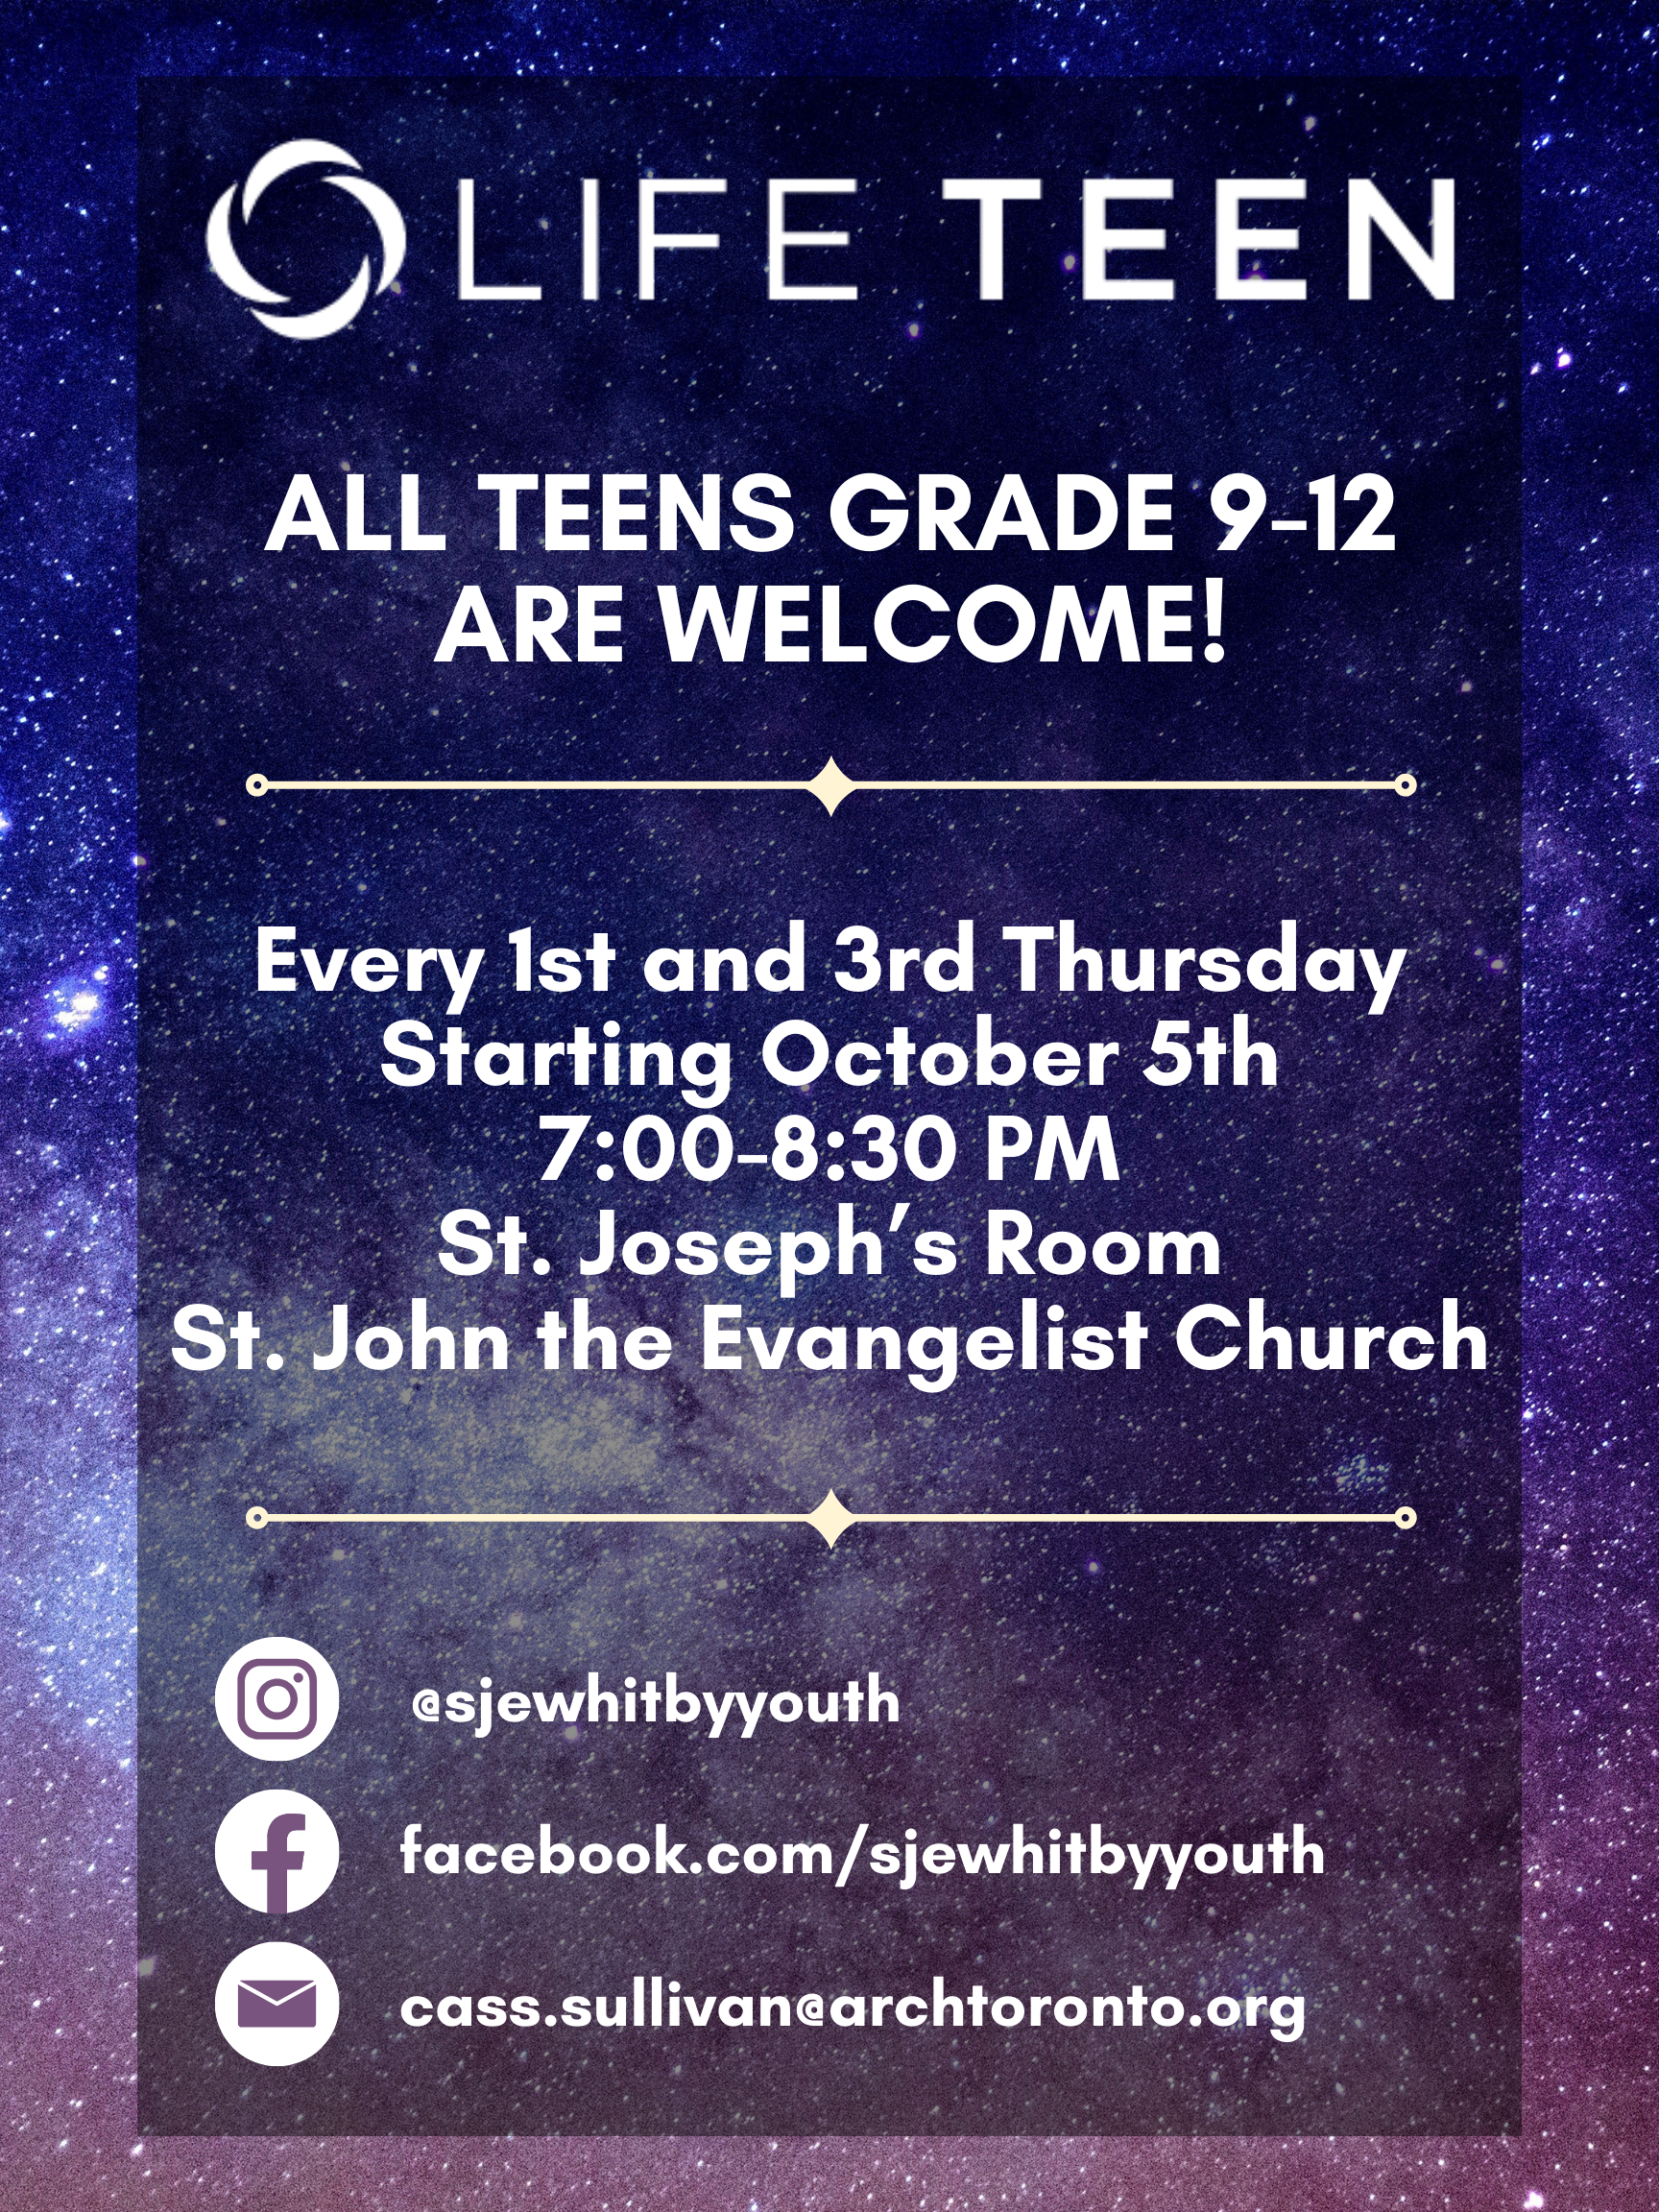 A poster with a starry night sky background advertising Life Teen program for teens in grade 9-12